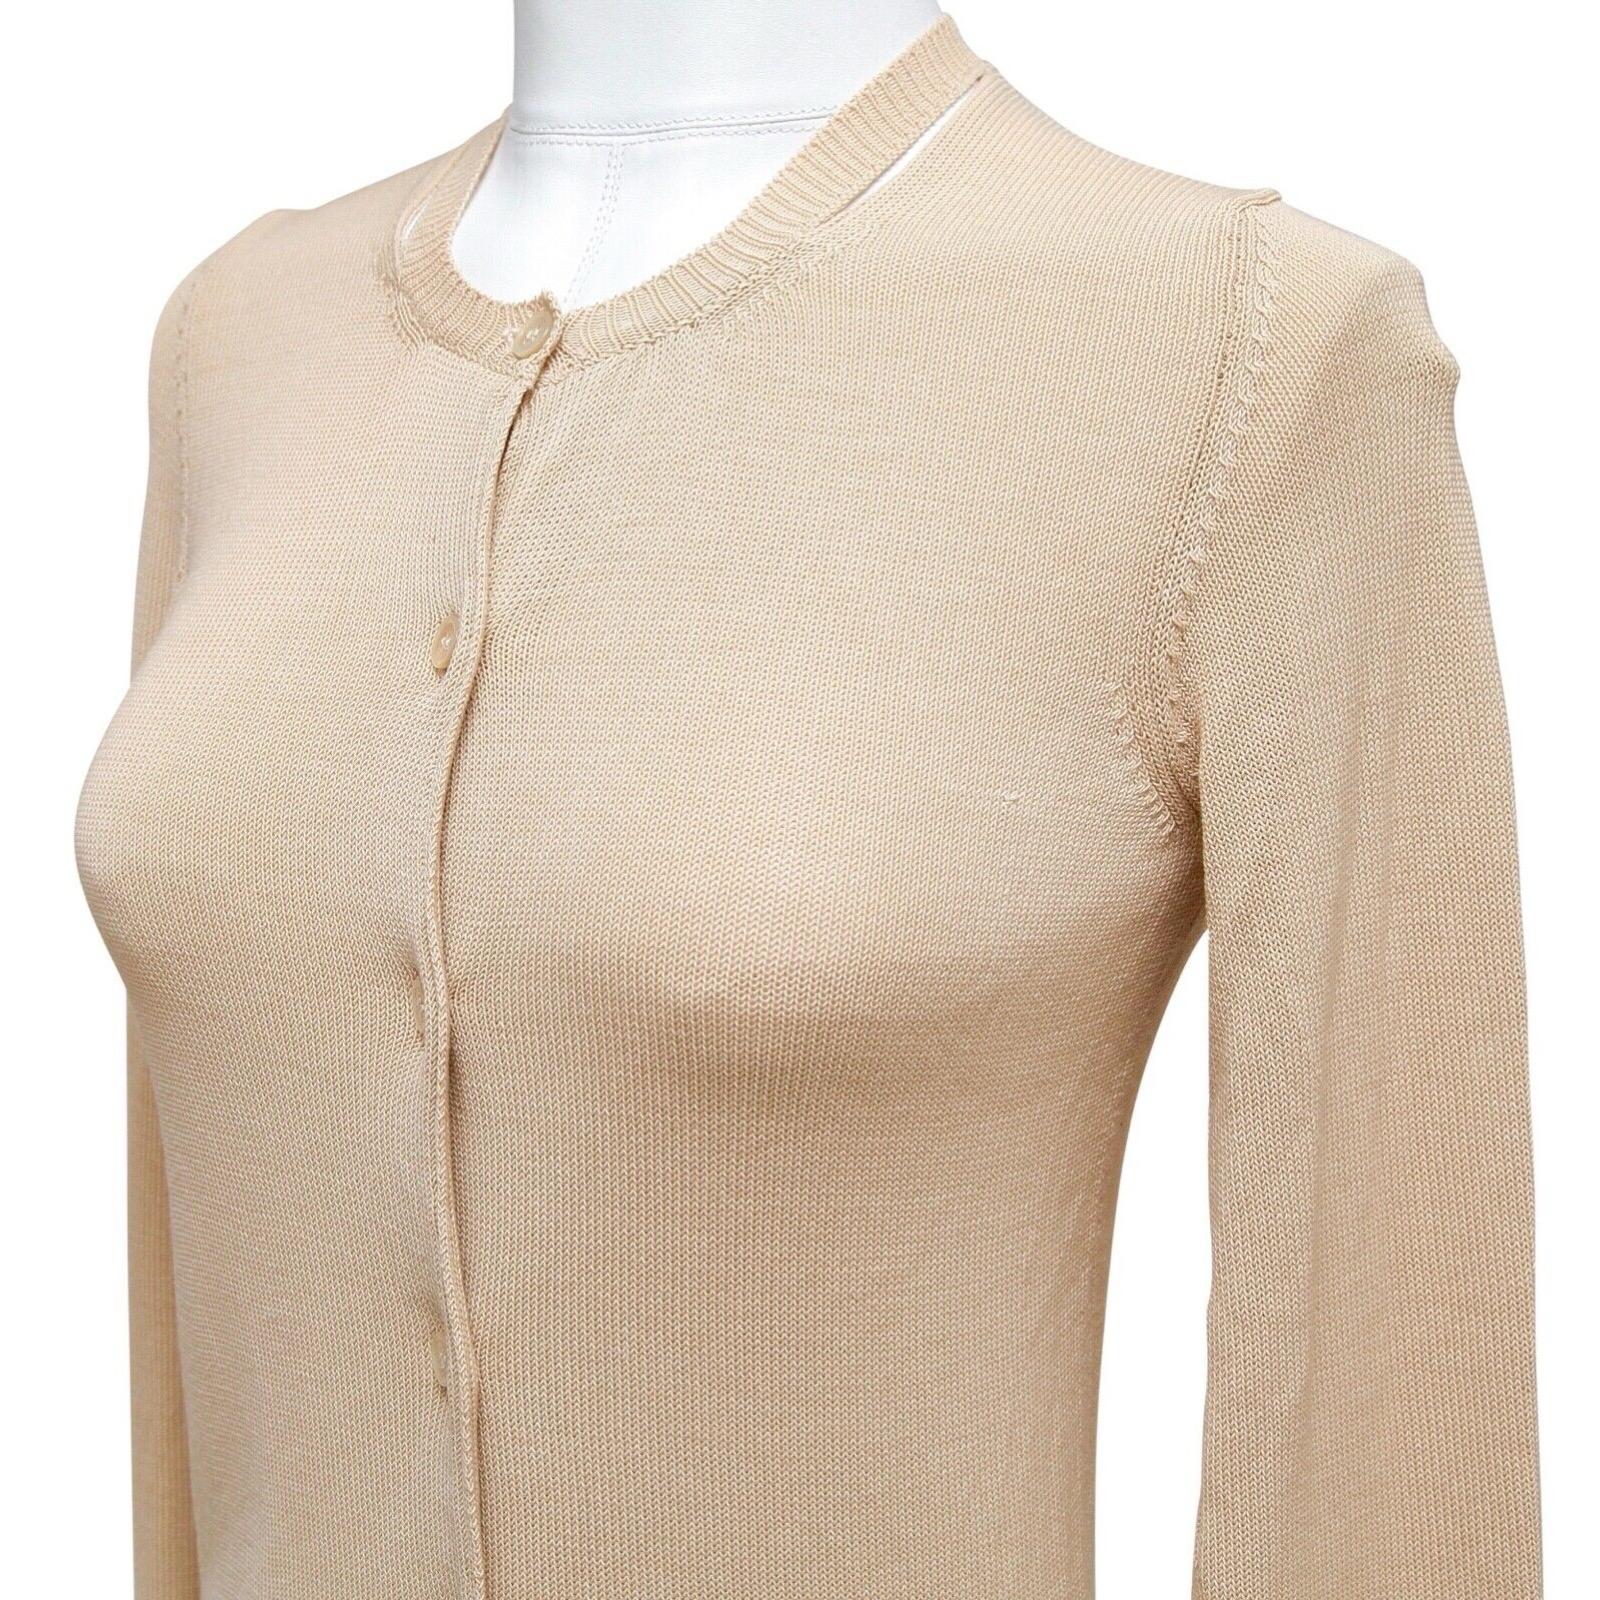 MARNI Beige Sweater Cardigan Knit Top Crewneck Long Sleeve Buttons Sz 38 In Good Condition In Hollywood, FL